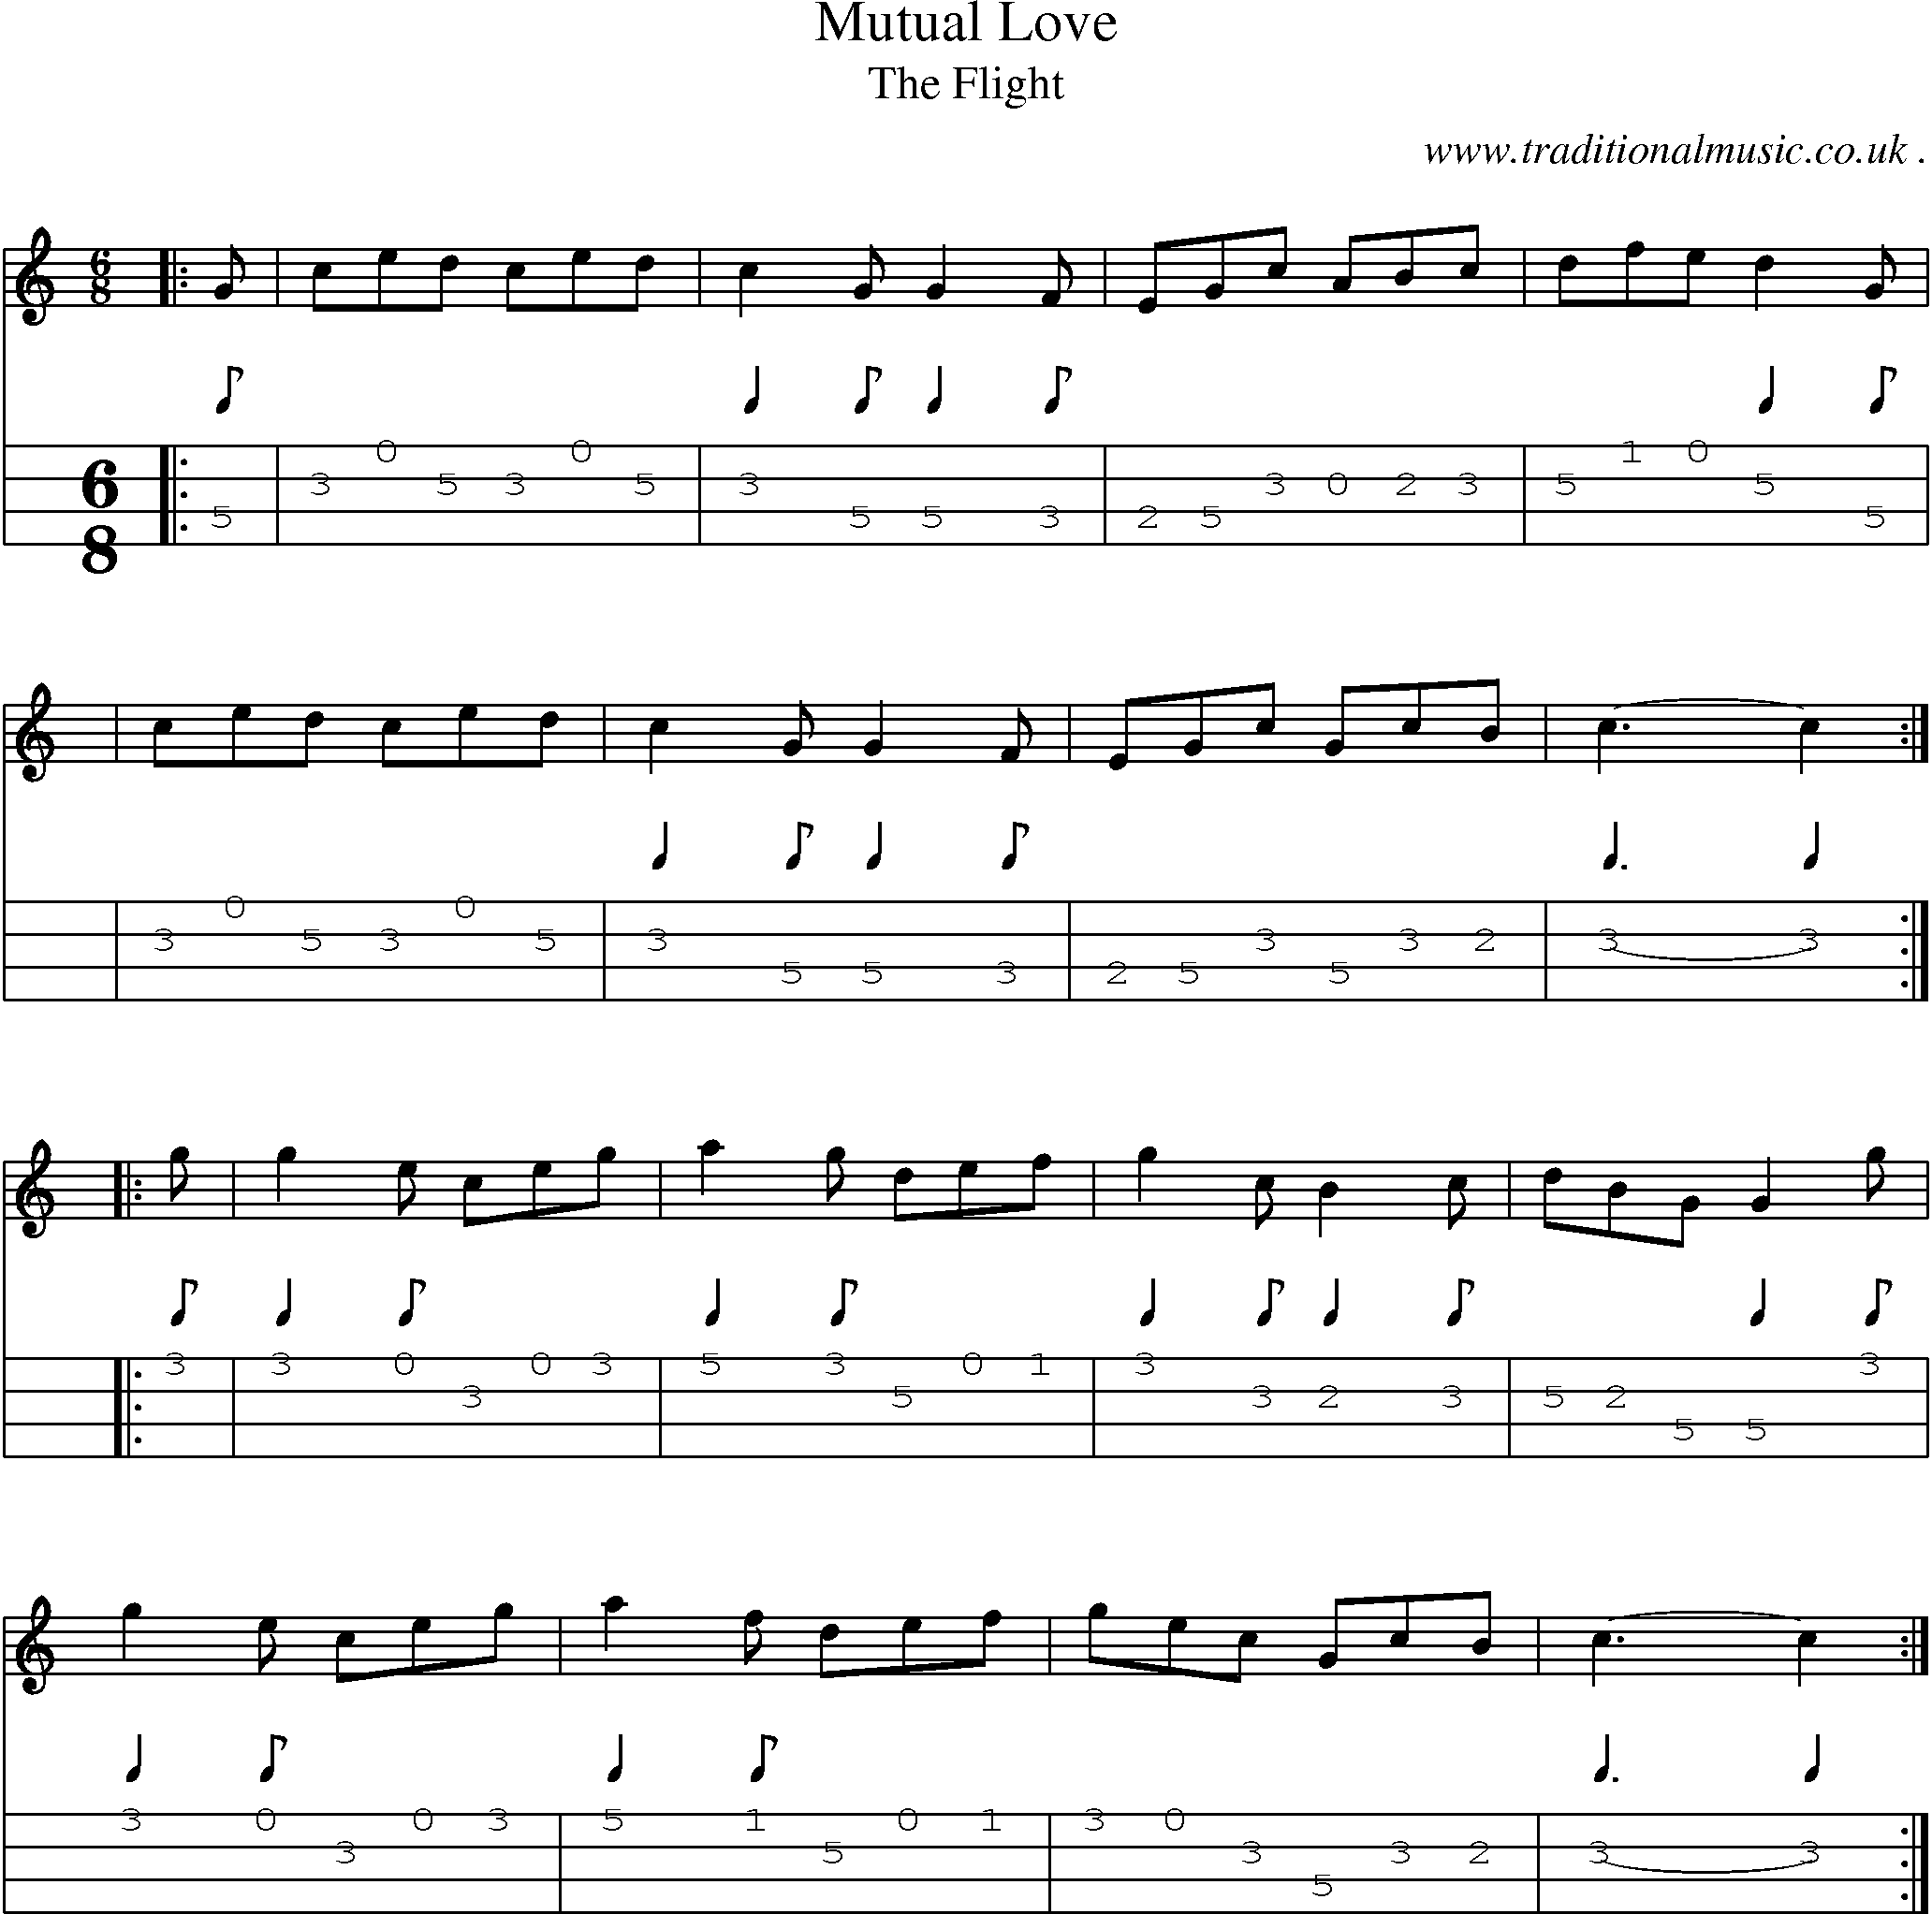 Sheet-Music and Mandolin Tabs for Mutual Love